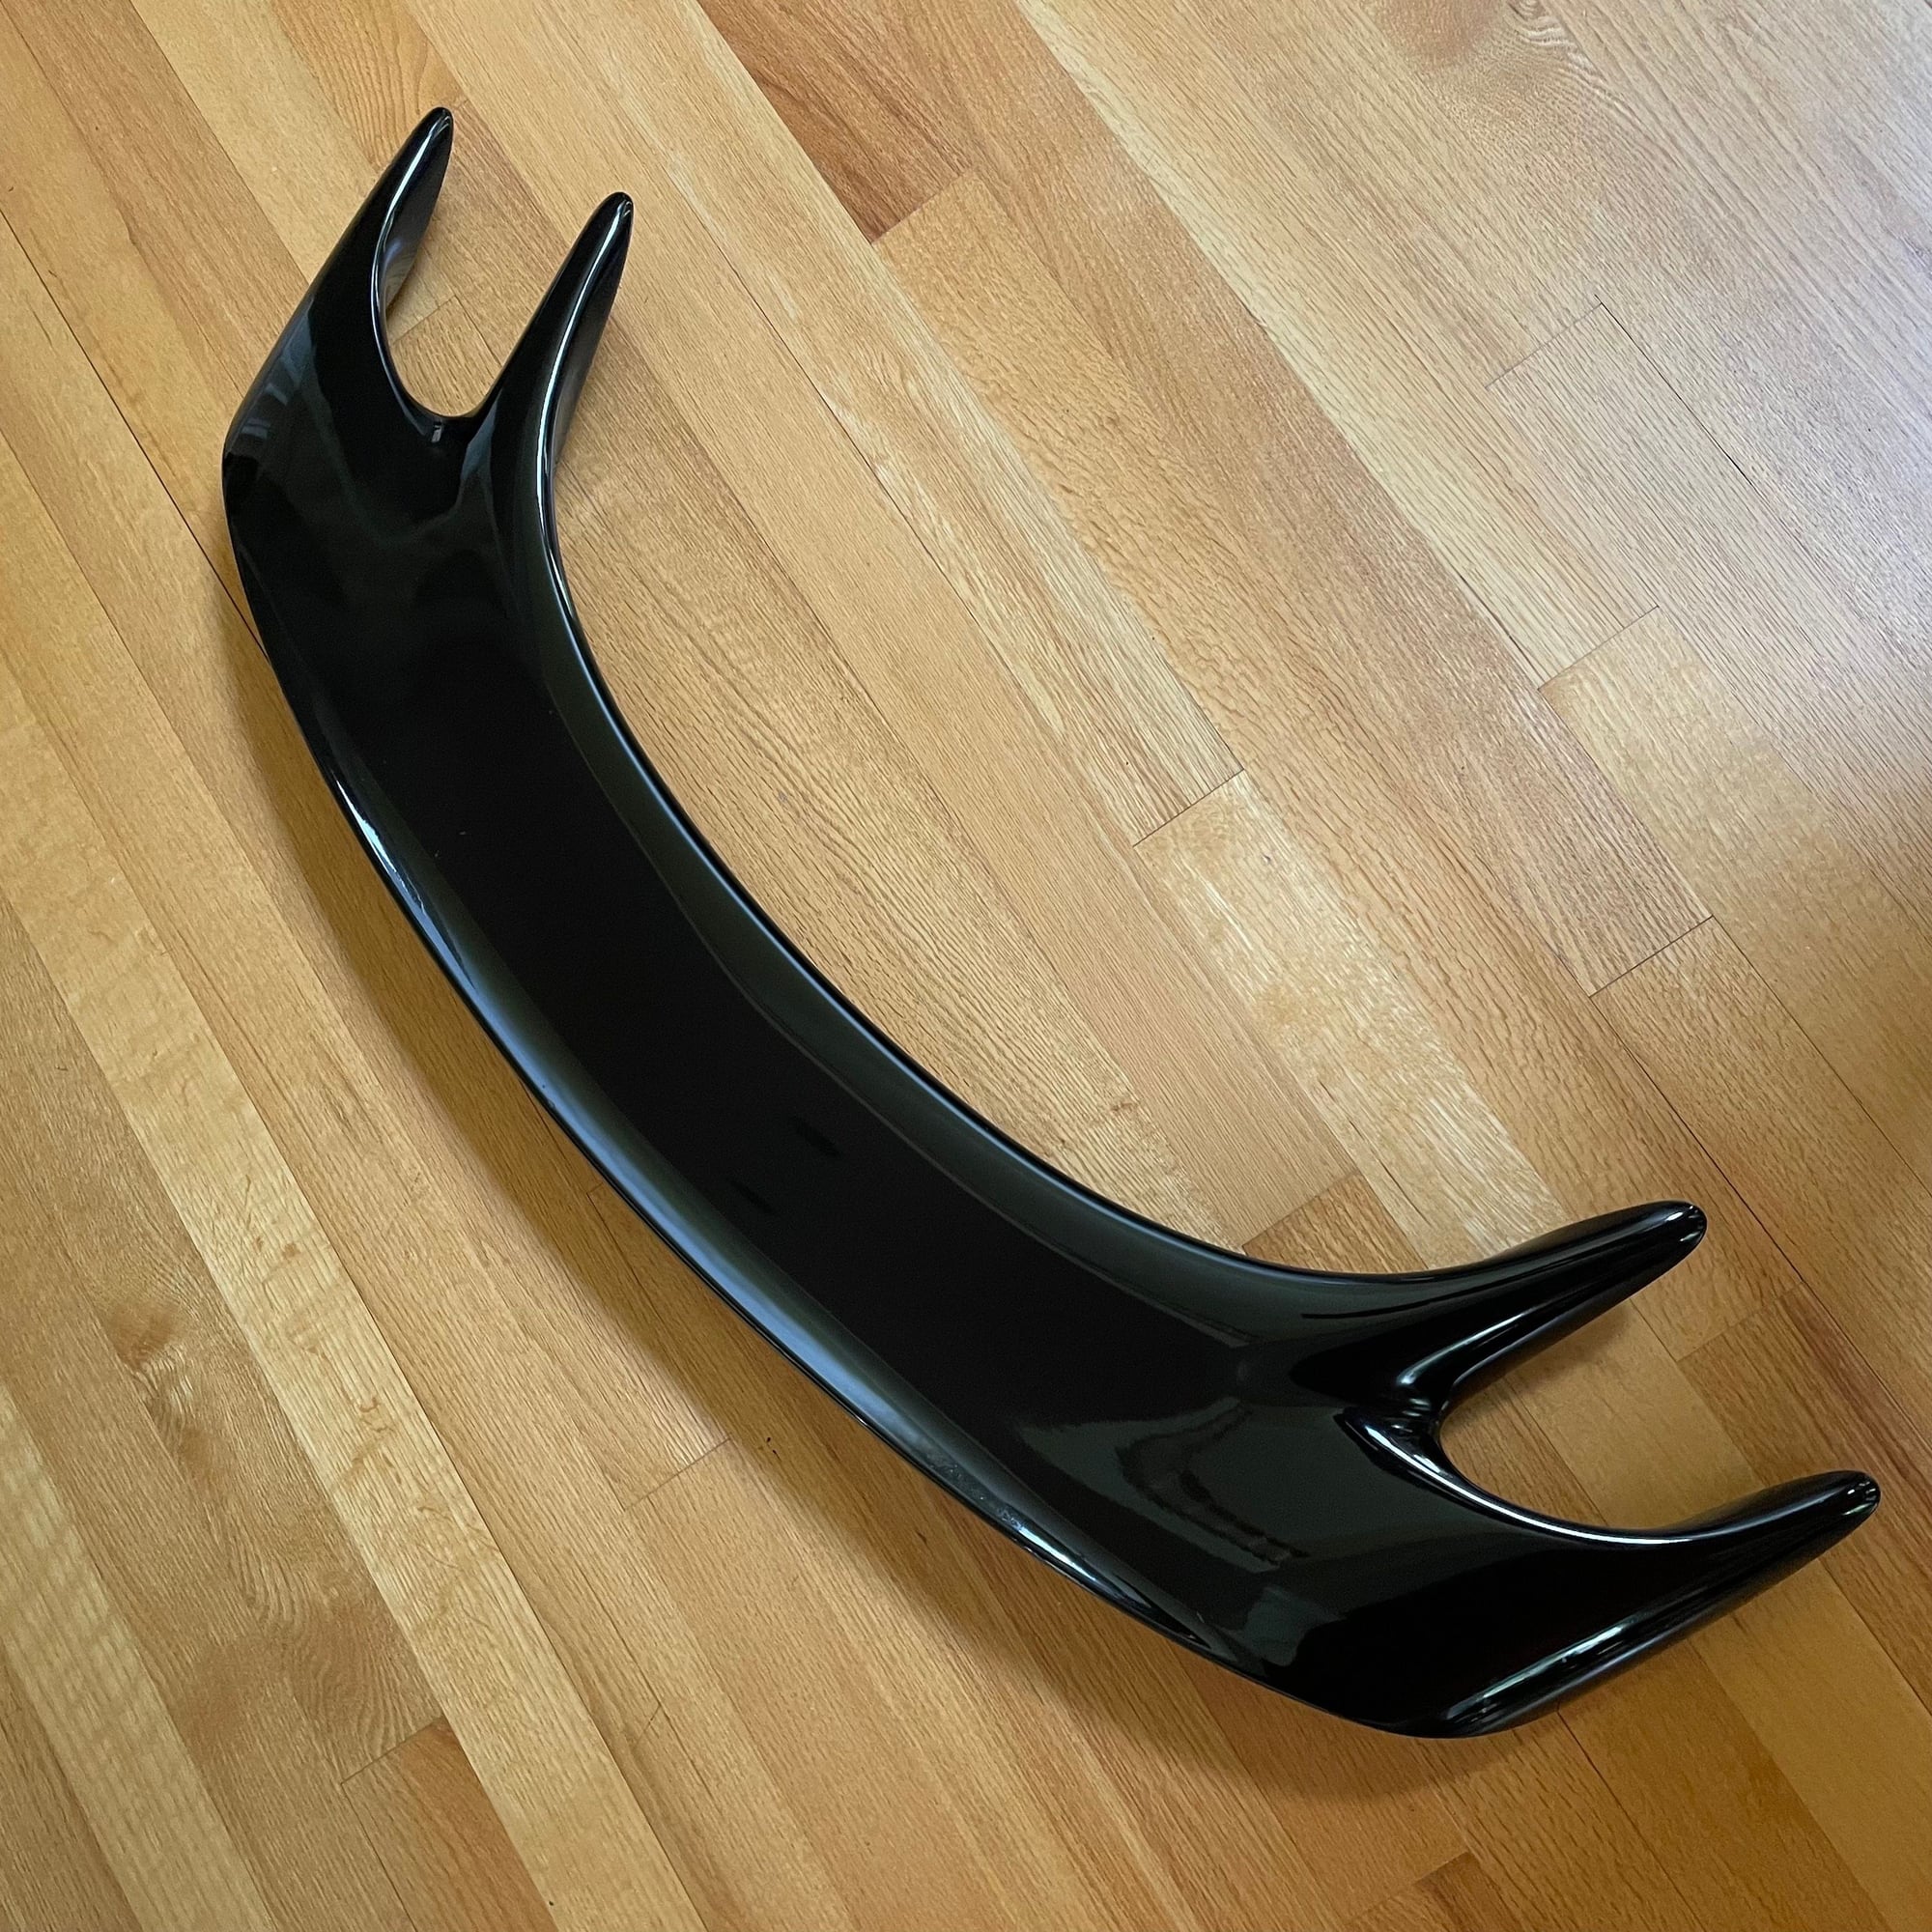 Exterior Body Parts - FS:  spoiler / wing (stock) for a 3rd gen - Used - 1992 to 2002 Mazda RX-7 - Tega Cay, SC 29708, United States